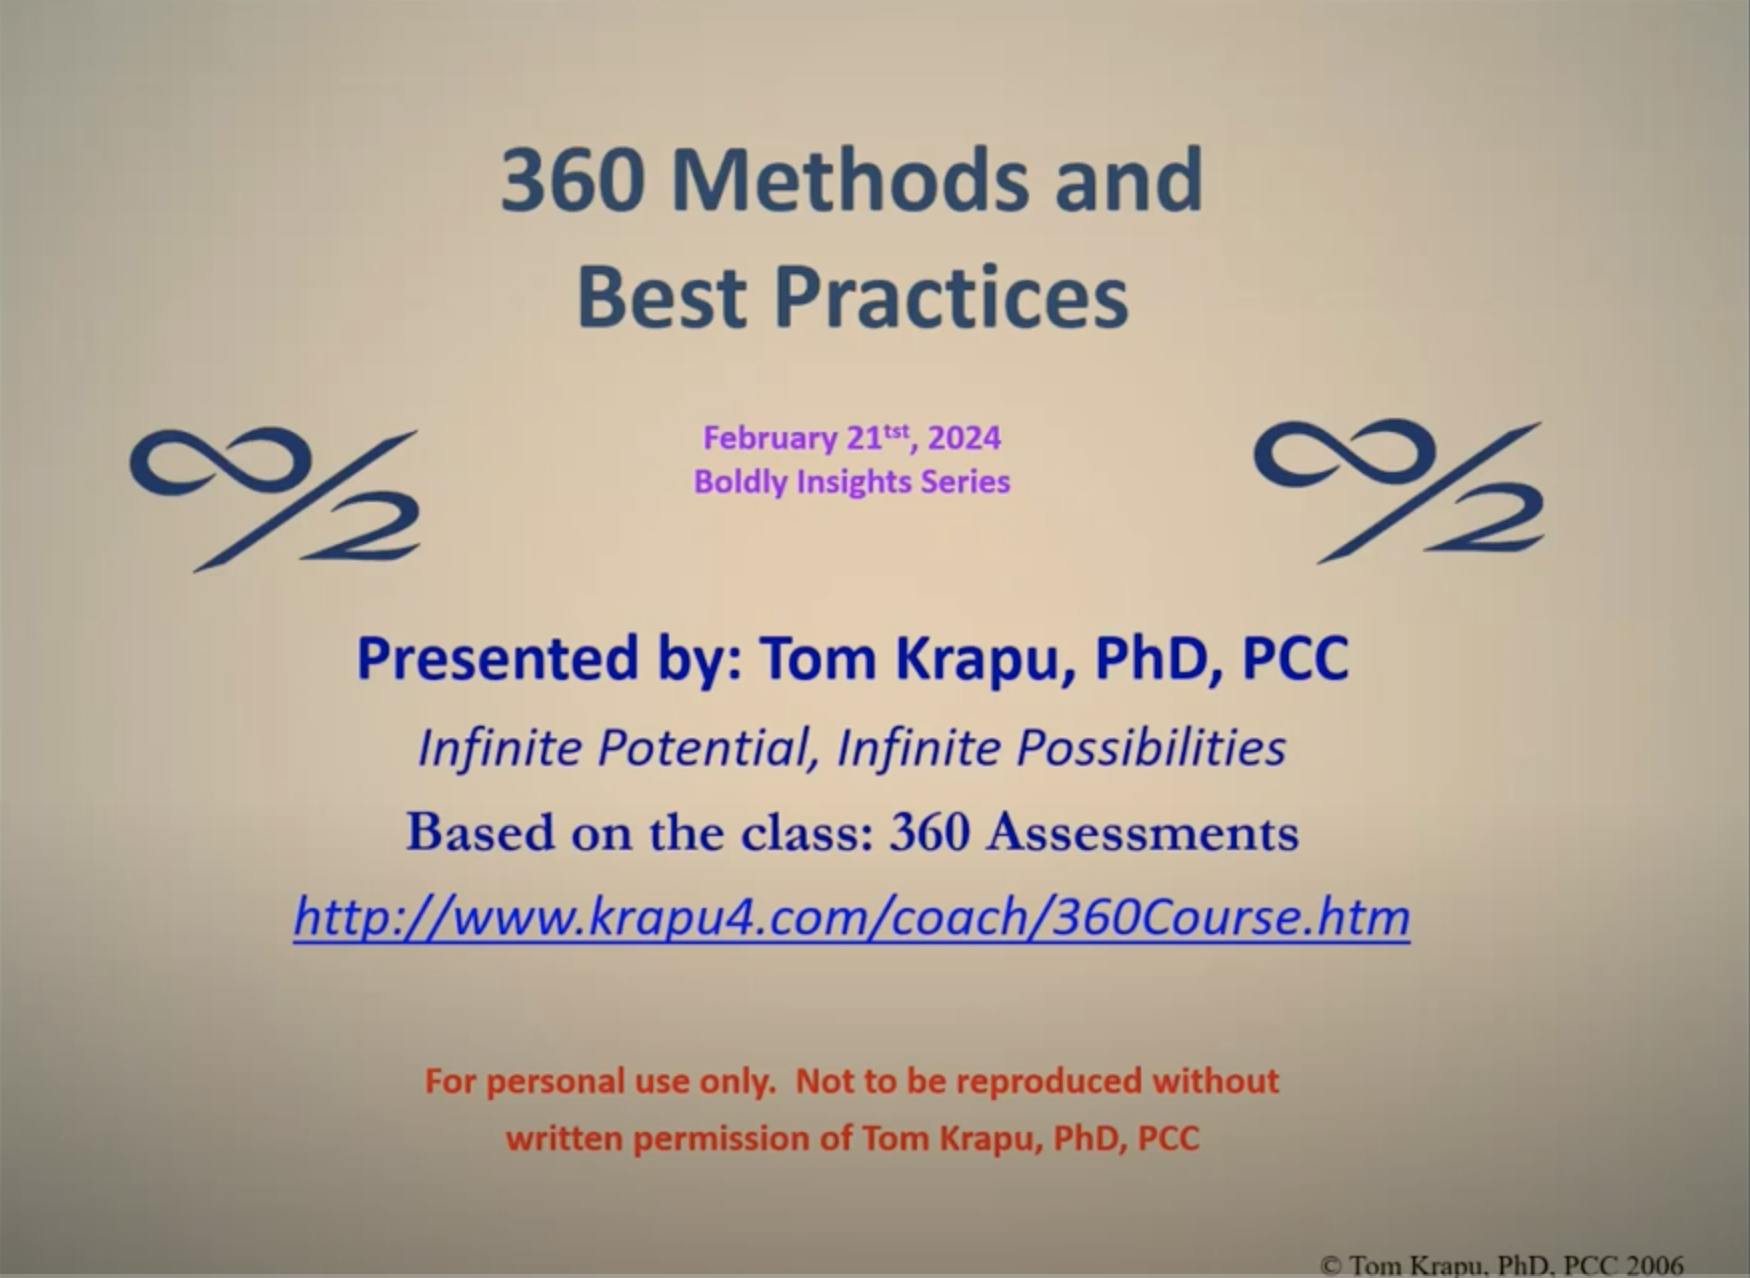 360 Methods and Best Practices with Tom Krapu